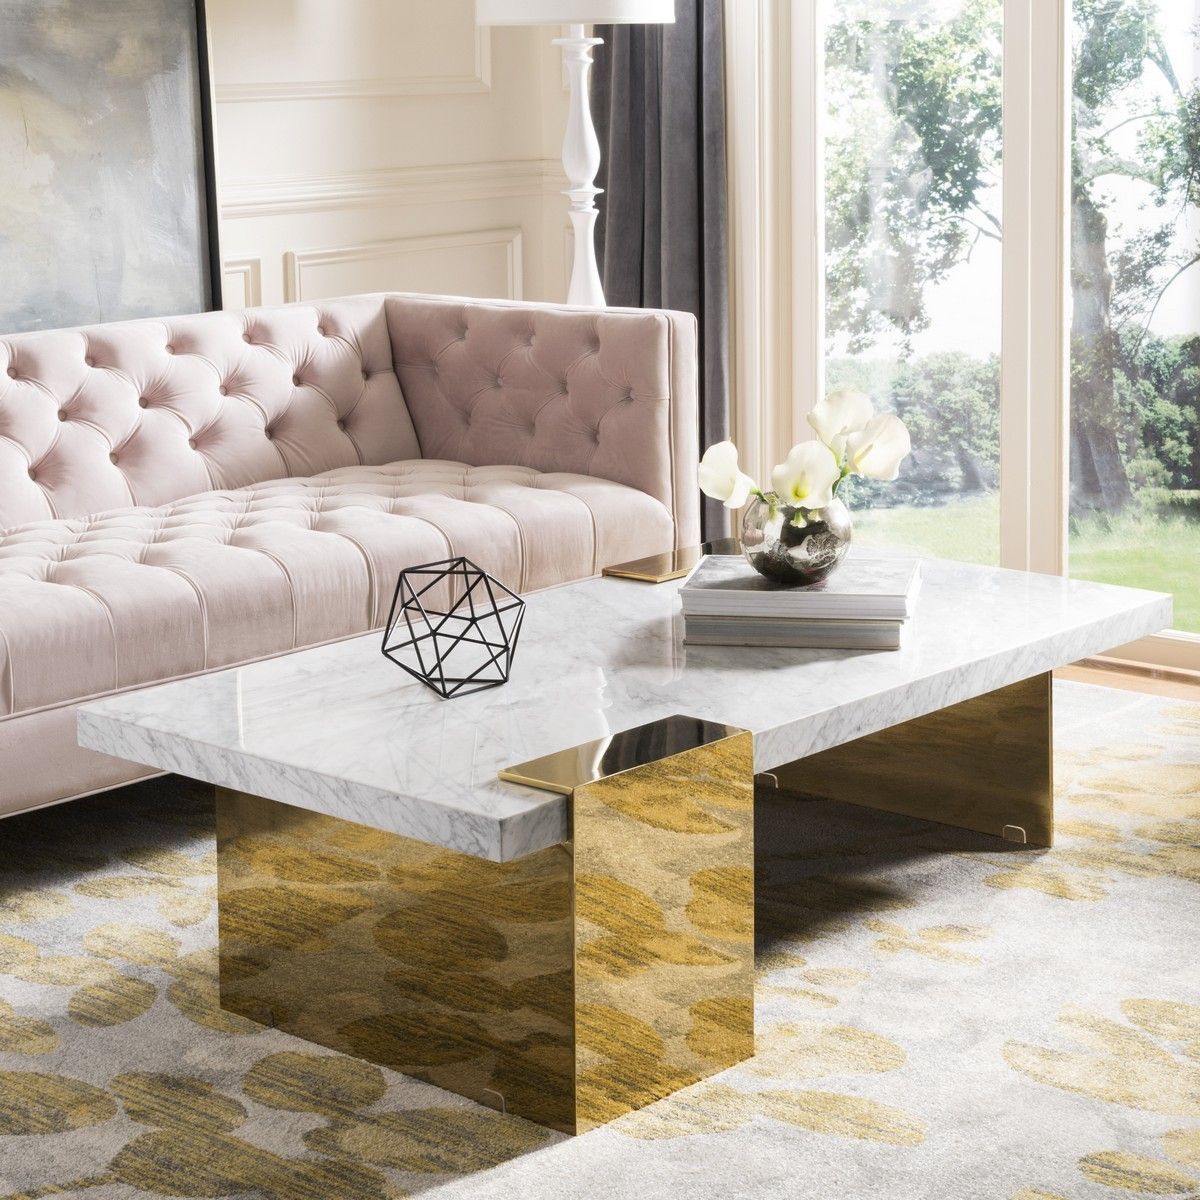 Sfv3541a 2bx – Safavieh | Marble Coffee Table, Faux Marble Coffee Table Pertaining To Waterproof Coffee Tables (View 13 of 21)